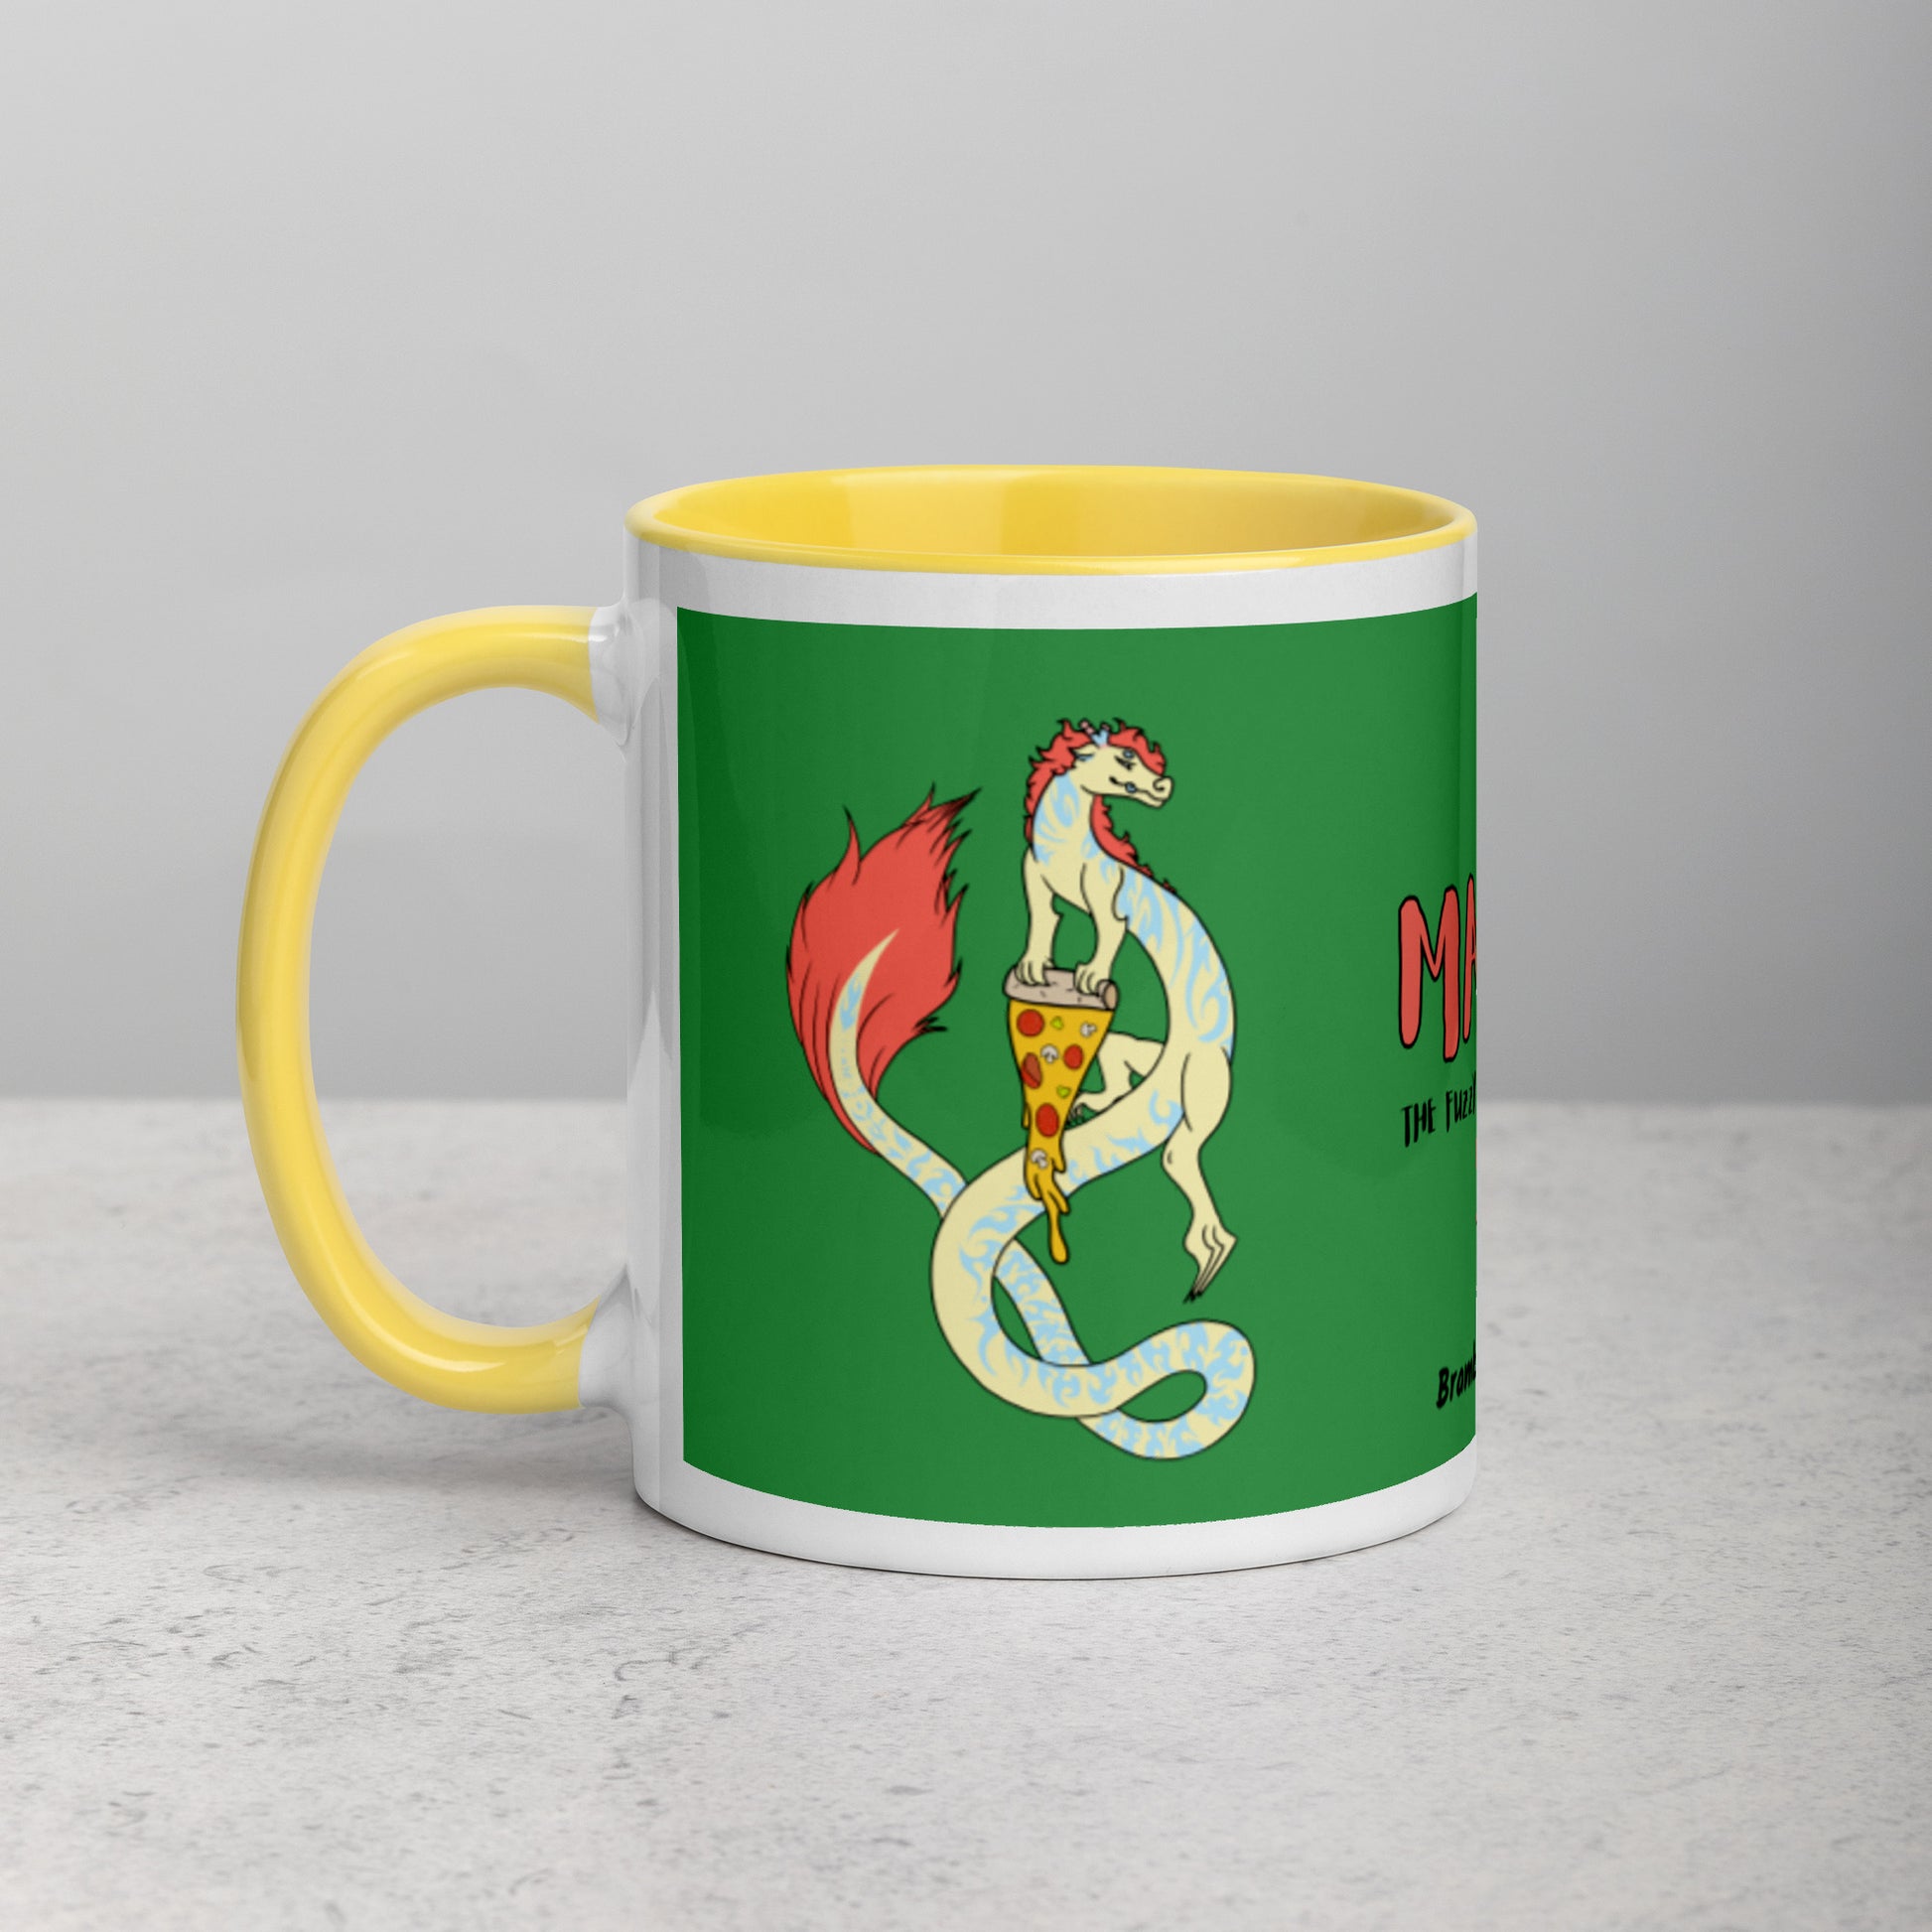 11 ounce white ceramic mug. Yellow inside and handle. Features double-sided image of Maisy the Fuzzy Noodle Dragon with a slice of pizza. Shown on tabletop.